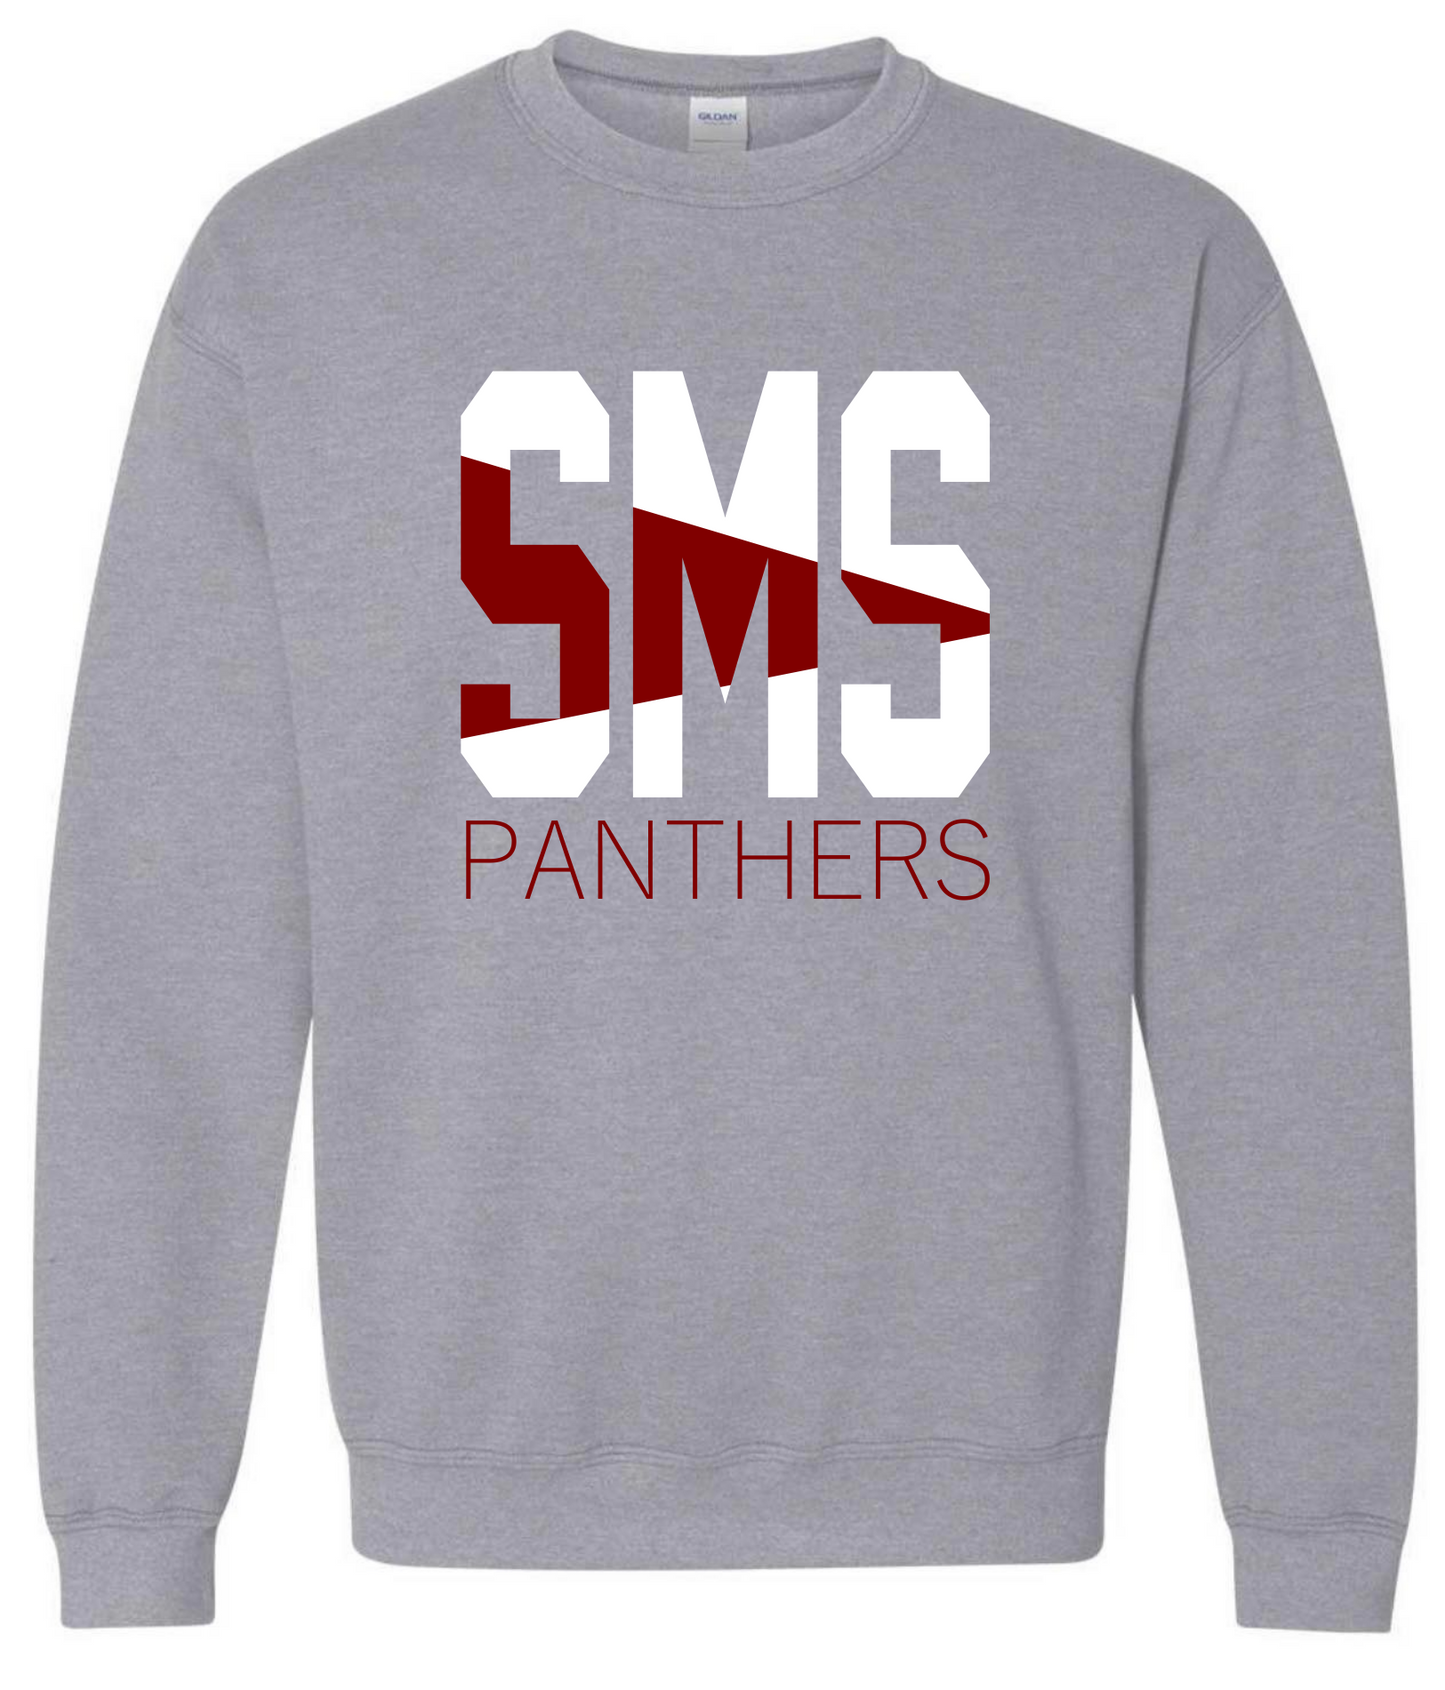 SMS Panthers Two Tone Sweatshirt